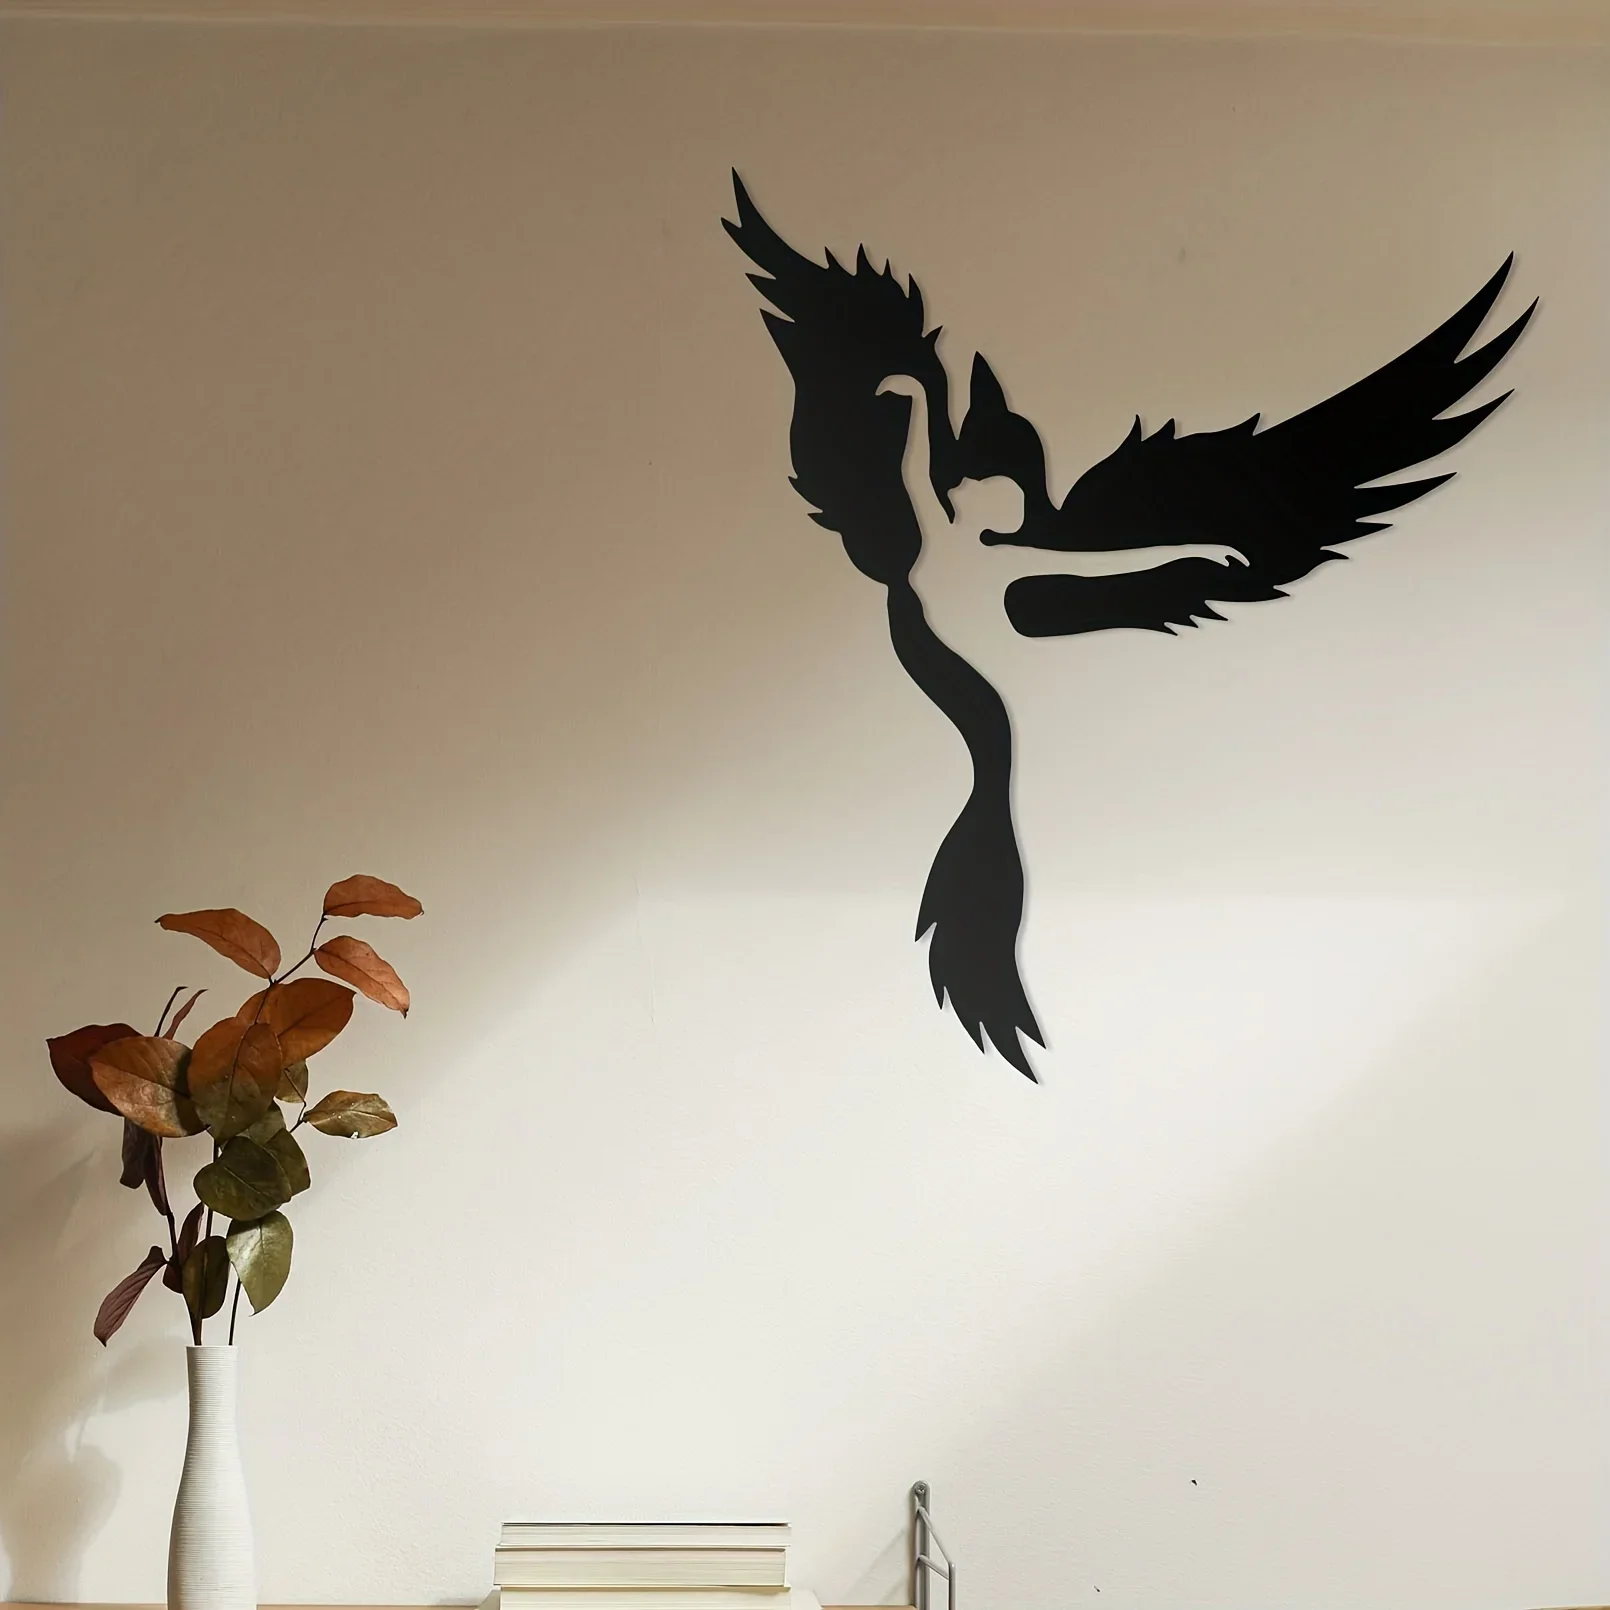 

CIFBUY Deco Metal Angel Bird Wall Mounted Decoration Simple Line Drawing Home Painting Wall Sculpture Kitchen Bathroom LivingRoo